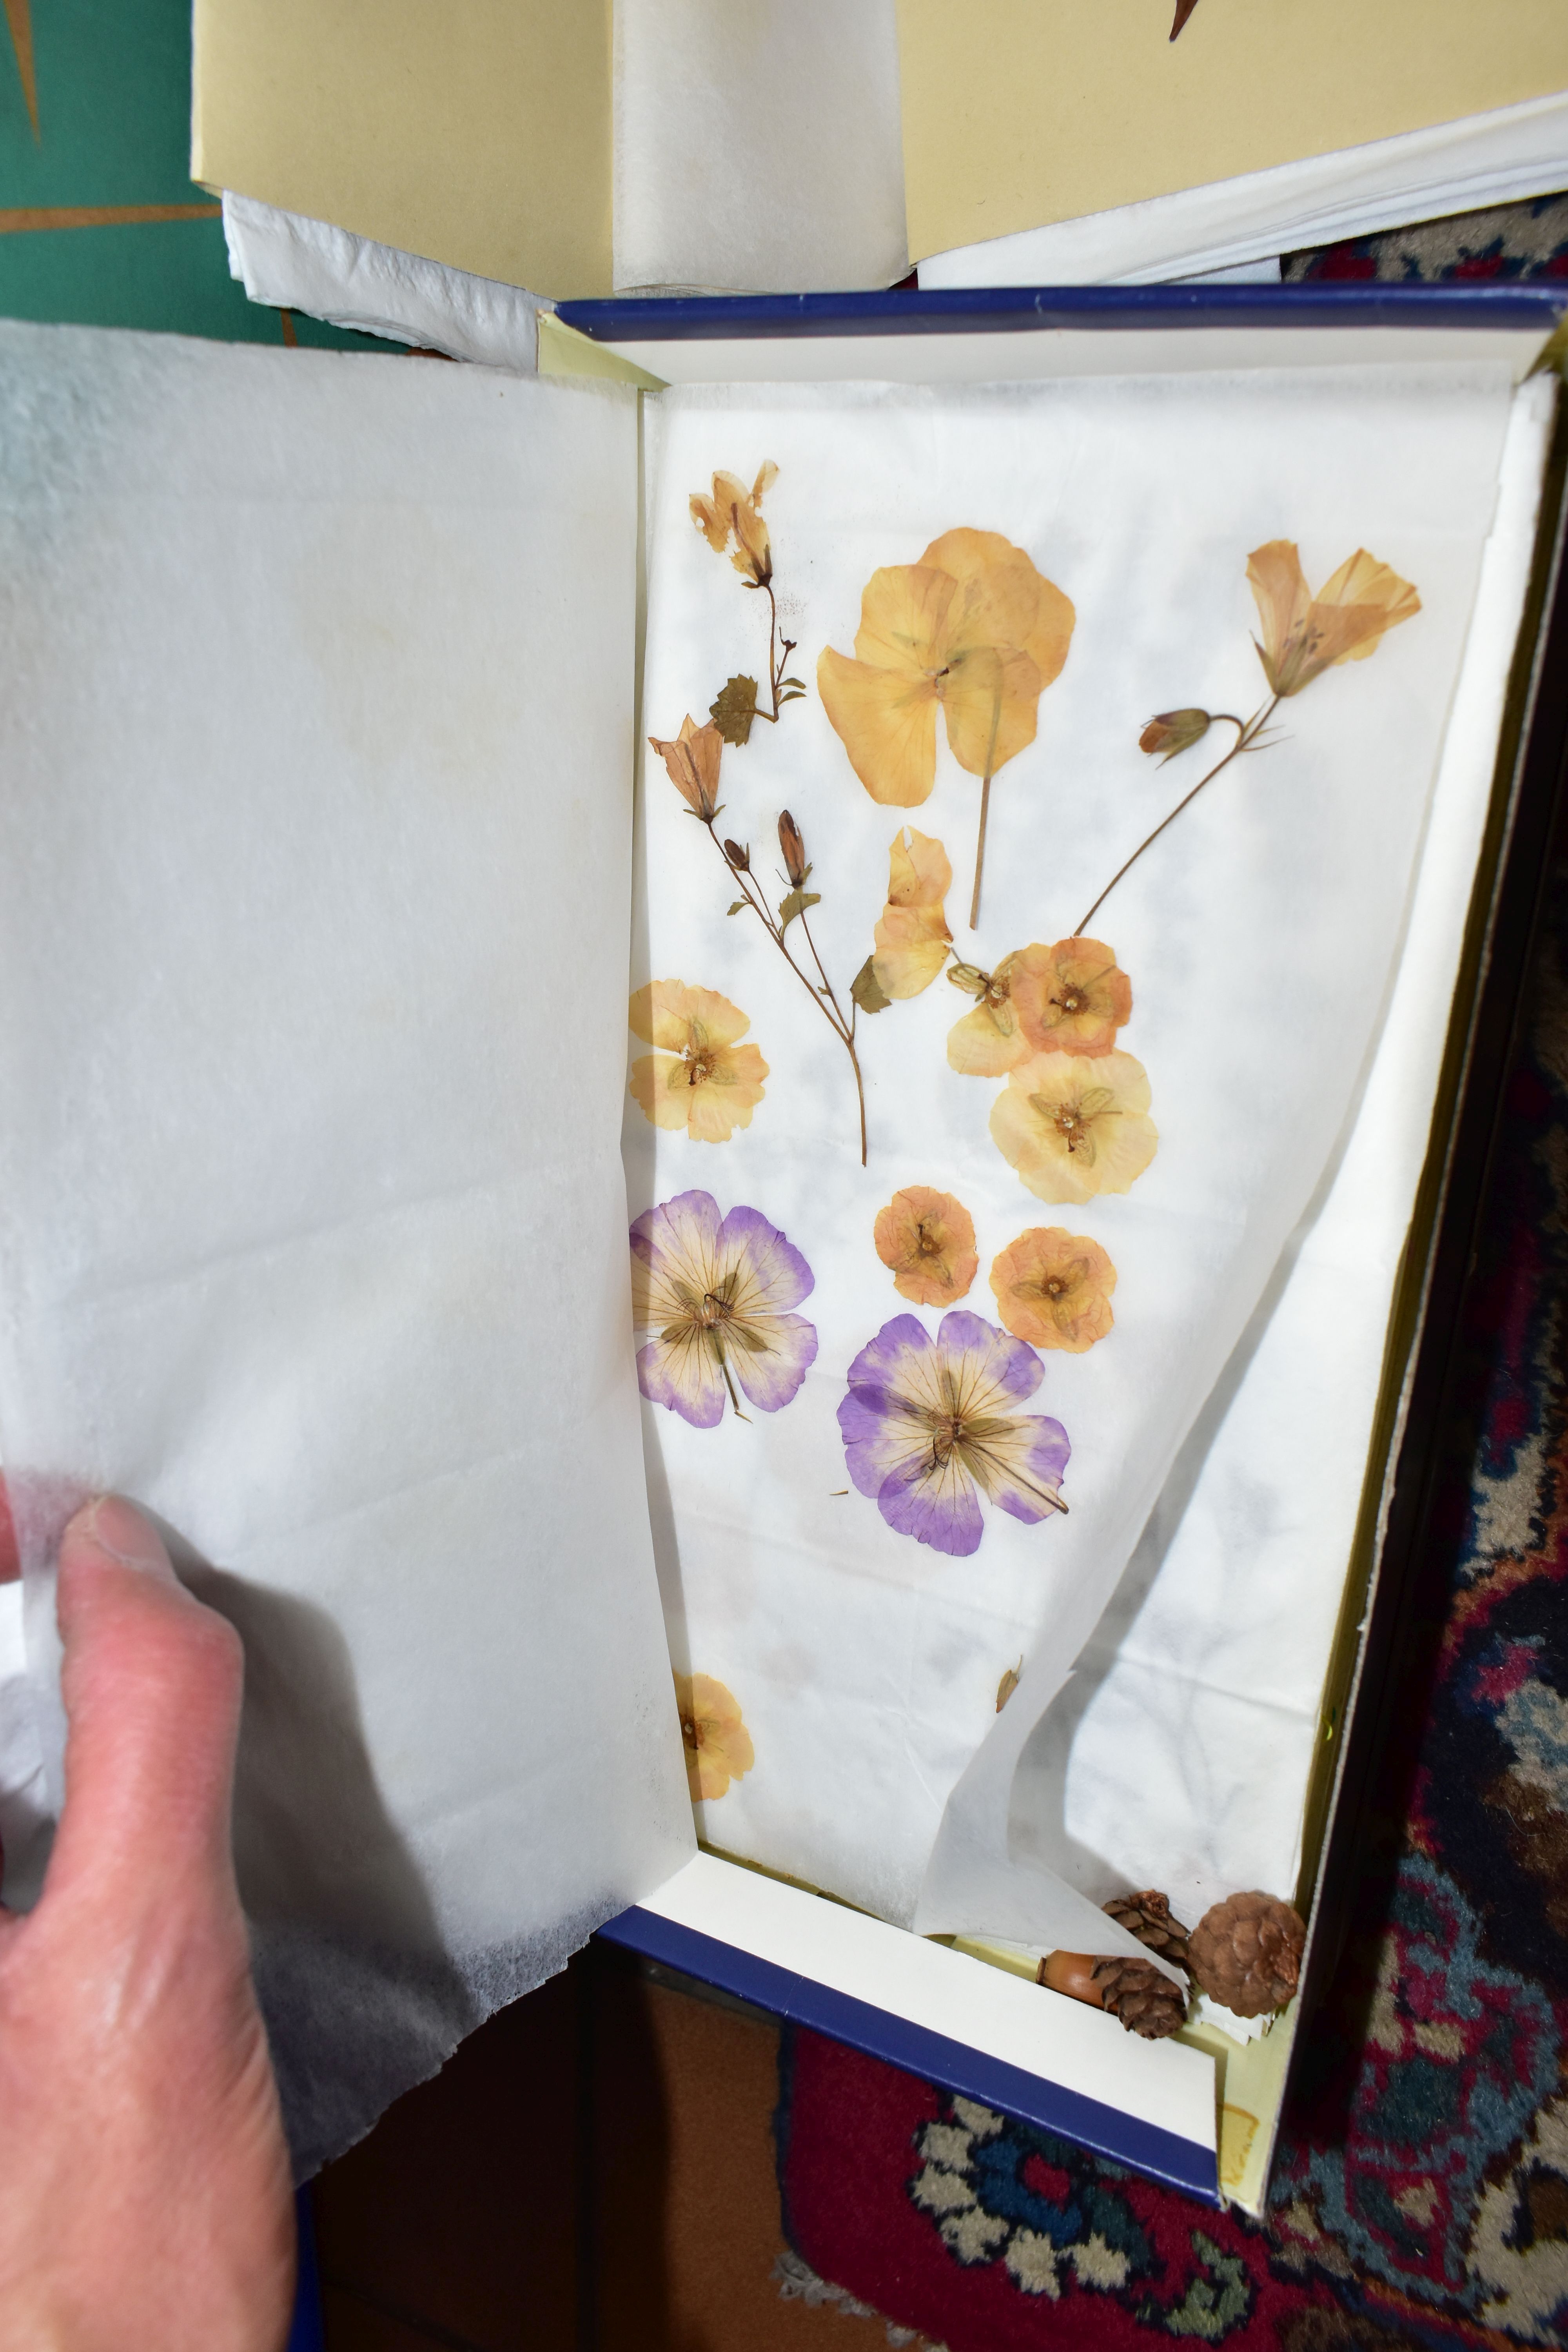 PRESSED FLOWERS & PRINTS, a large collection of pressed flowers in corrugated cardboard and - Image 5 of 5